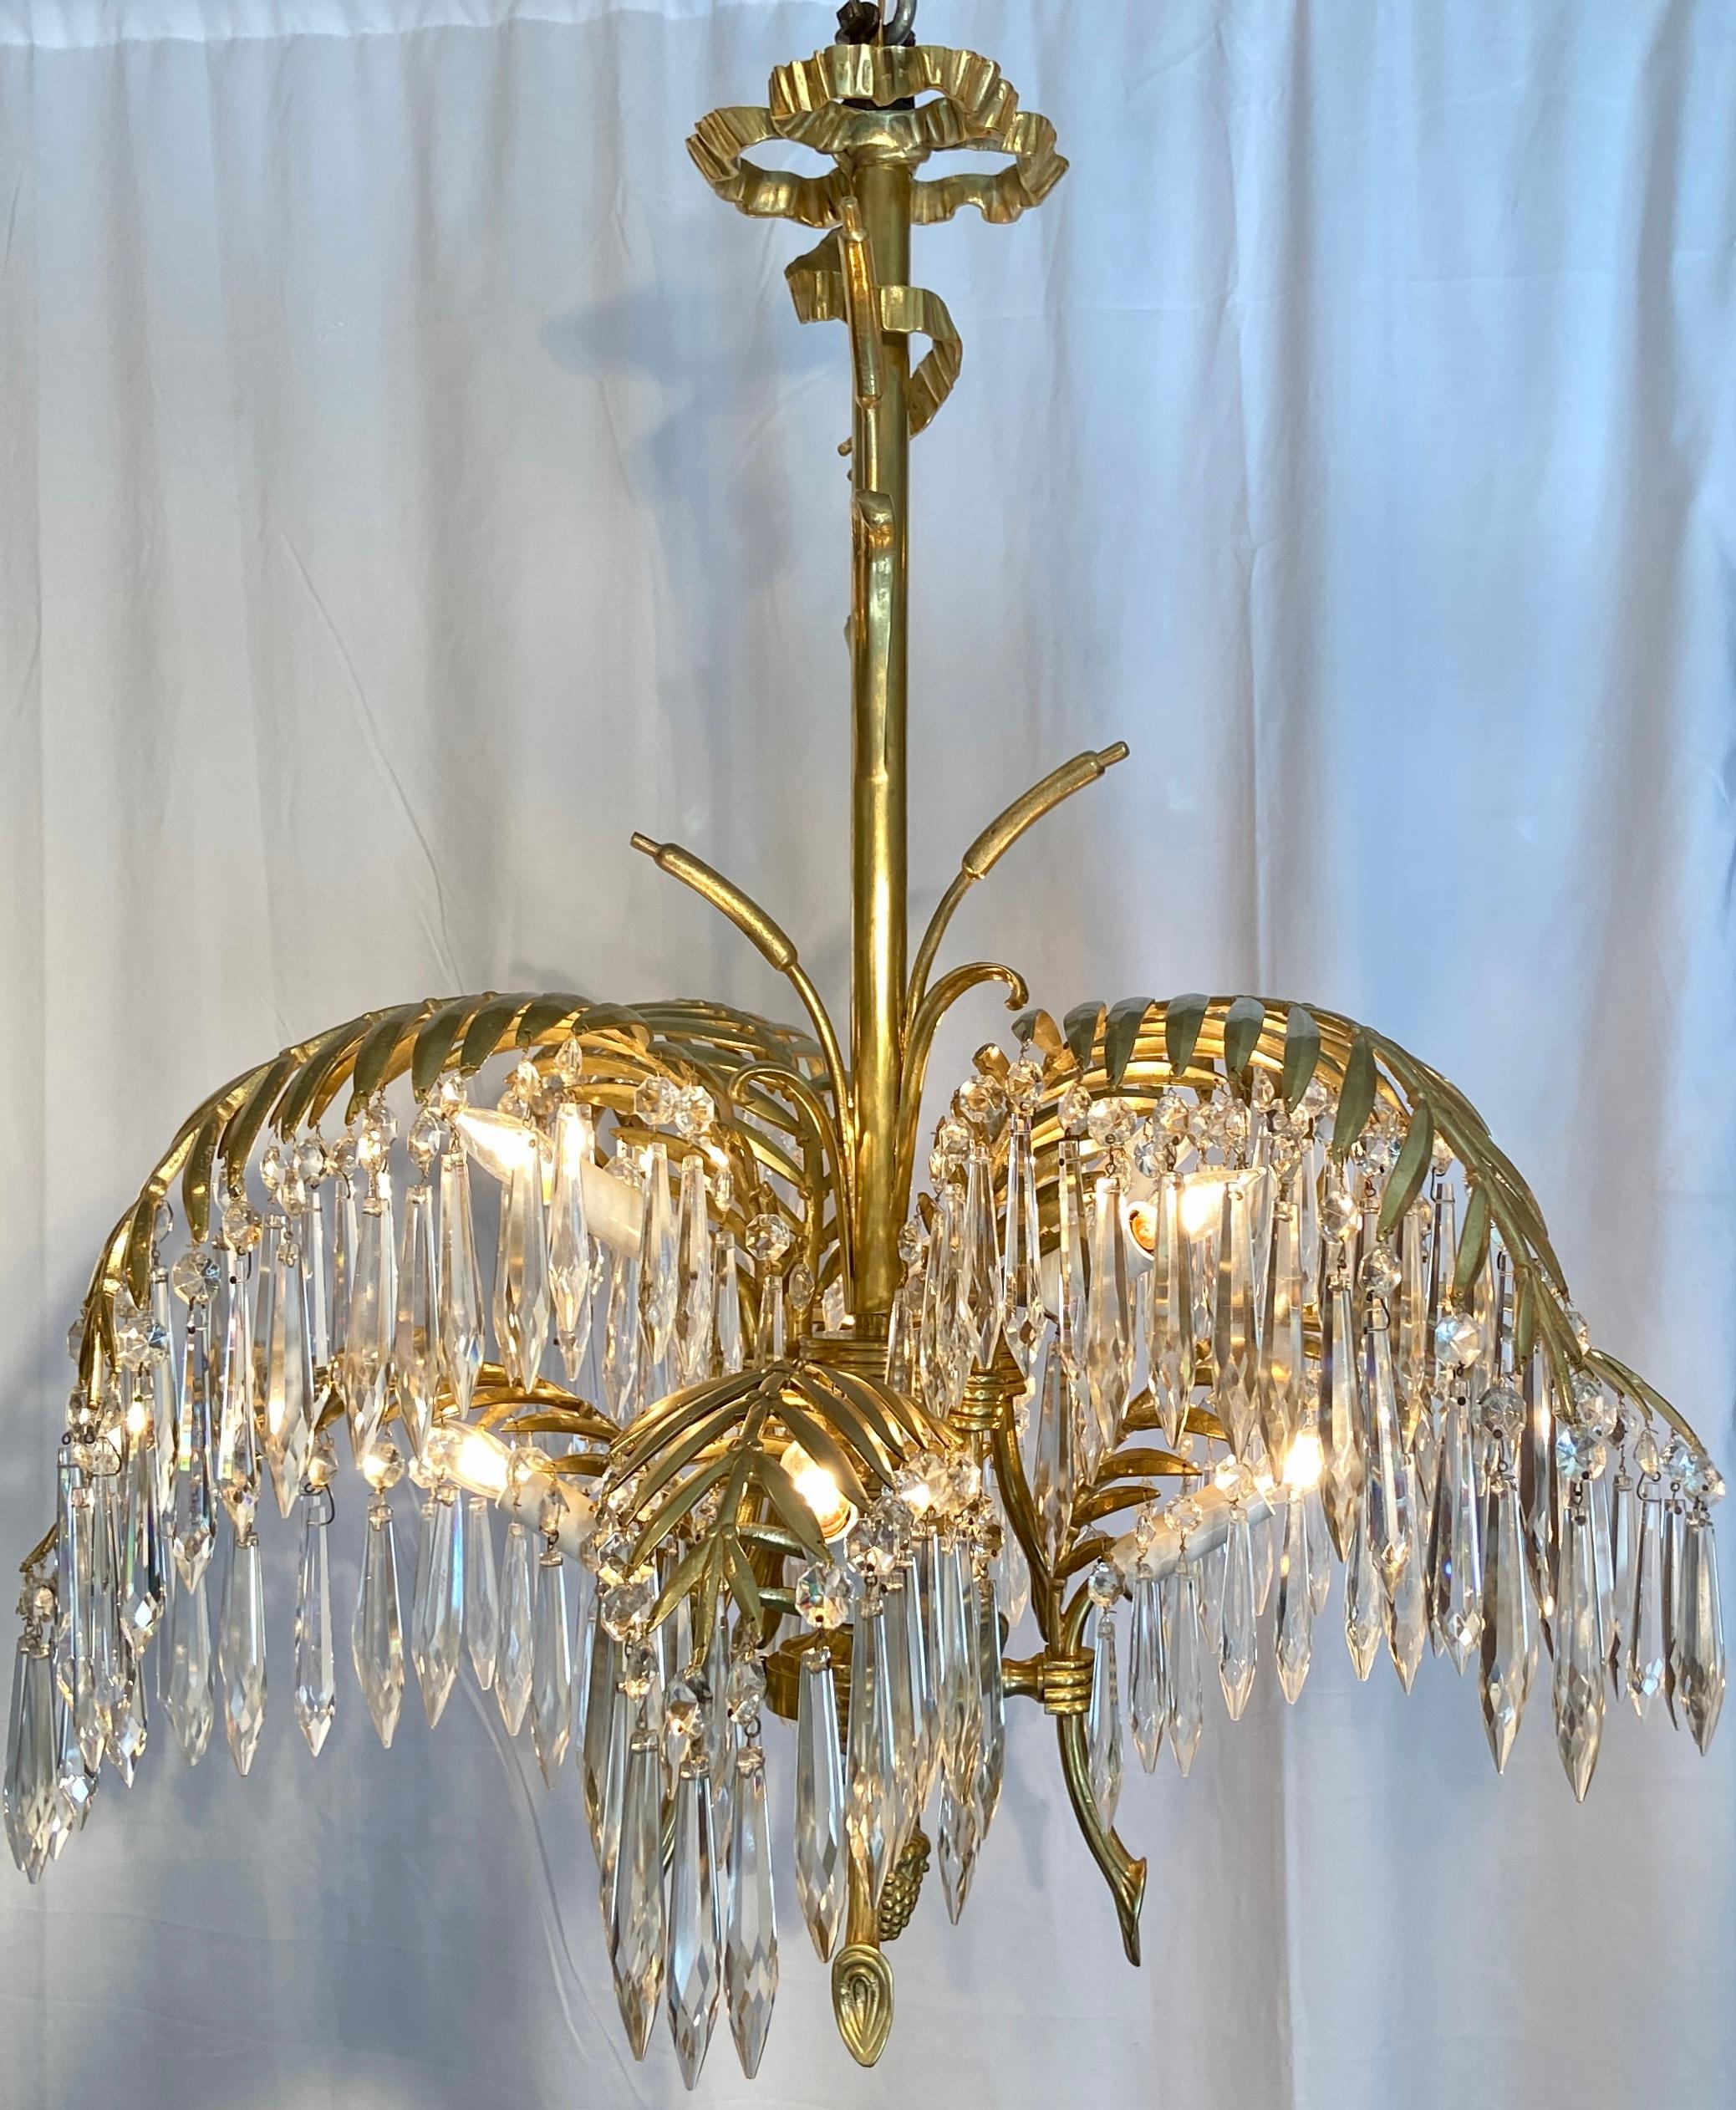 Antique French gold bronze and cut crystal palm chandelier, circa 1890.